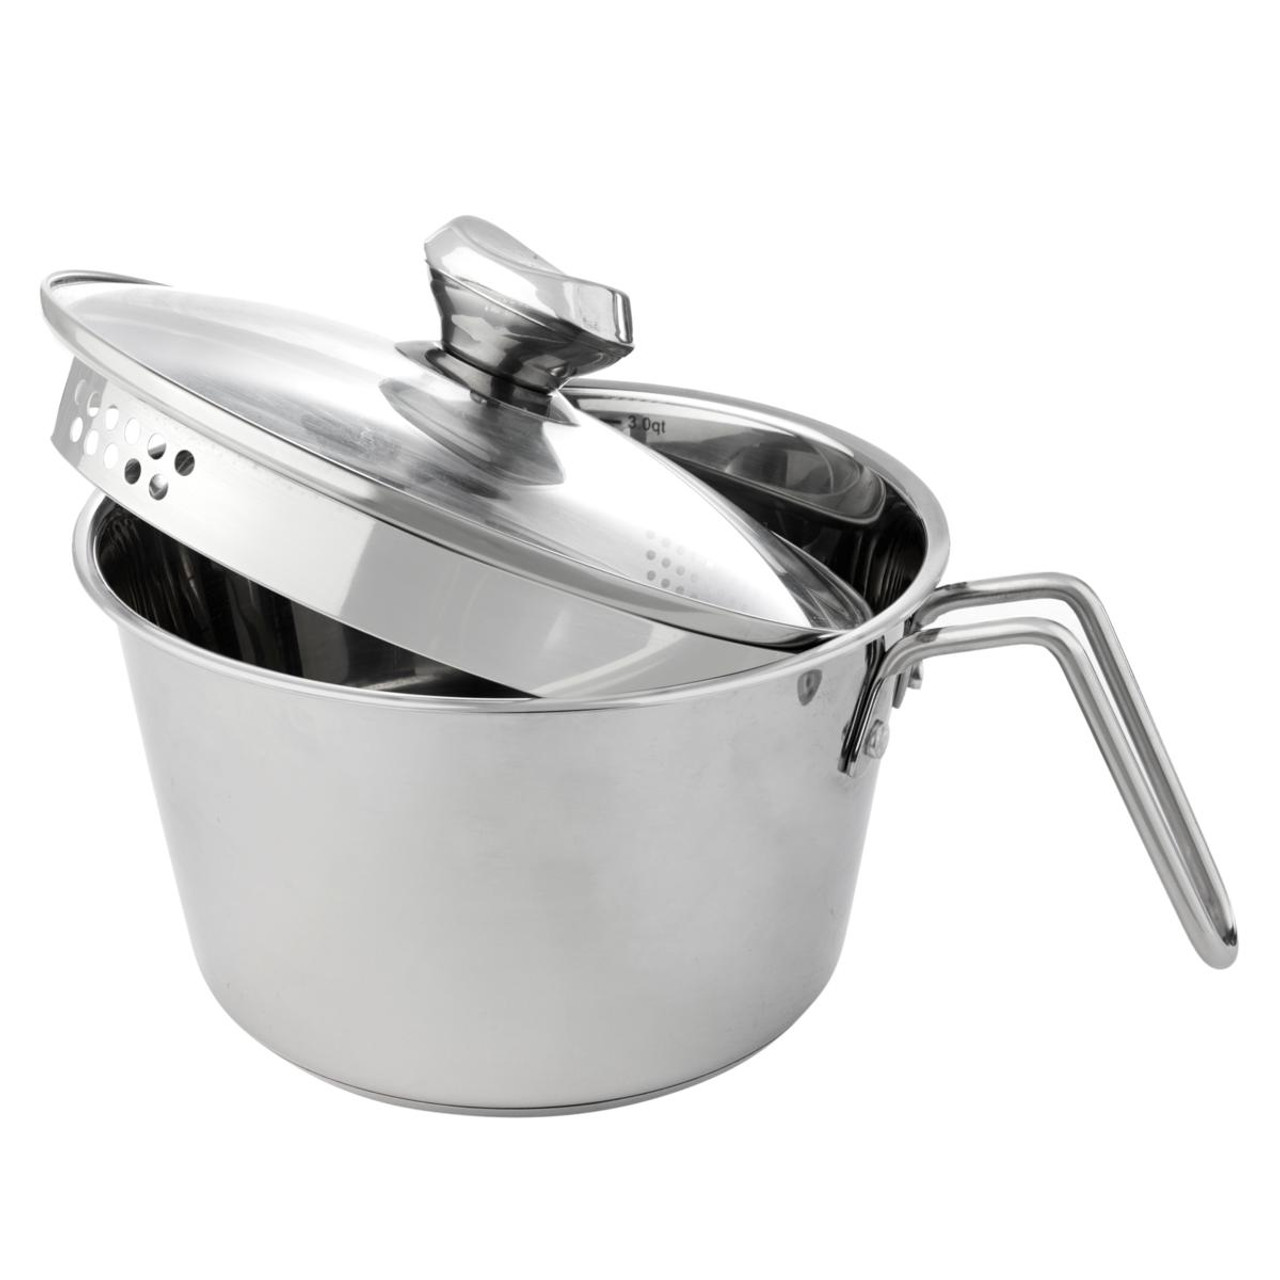 Wolfgang Puck 12-Cup Stainless Steel Pot with Colander Lid - Refurbished